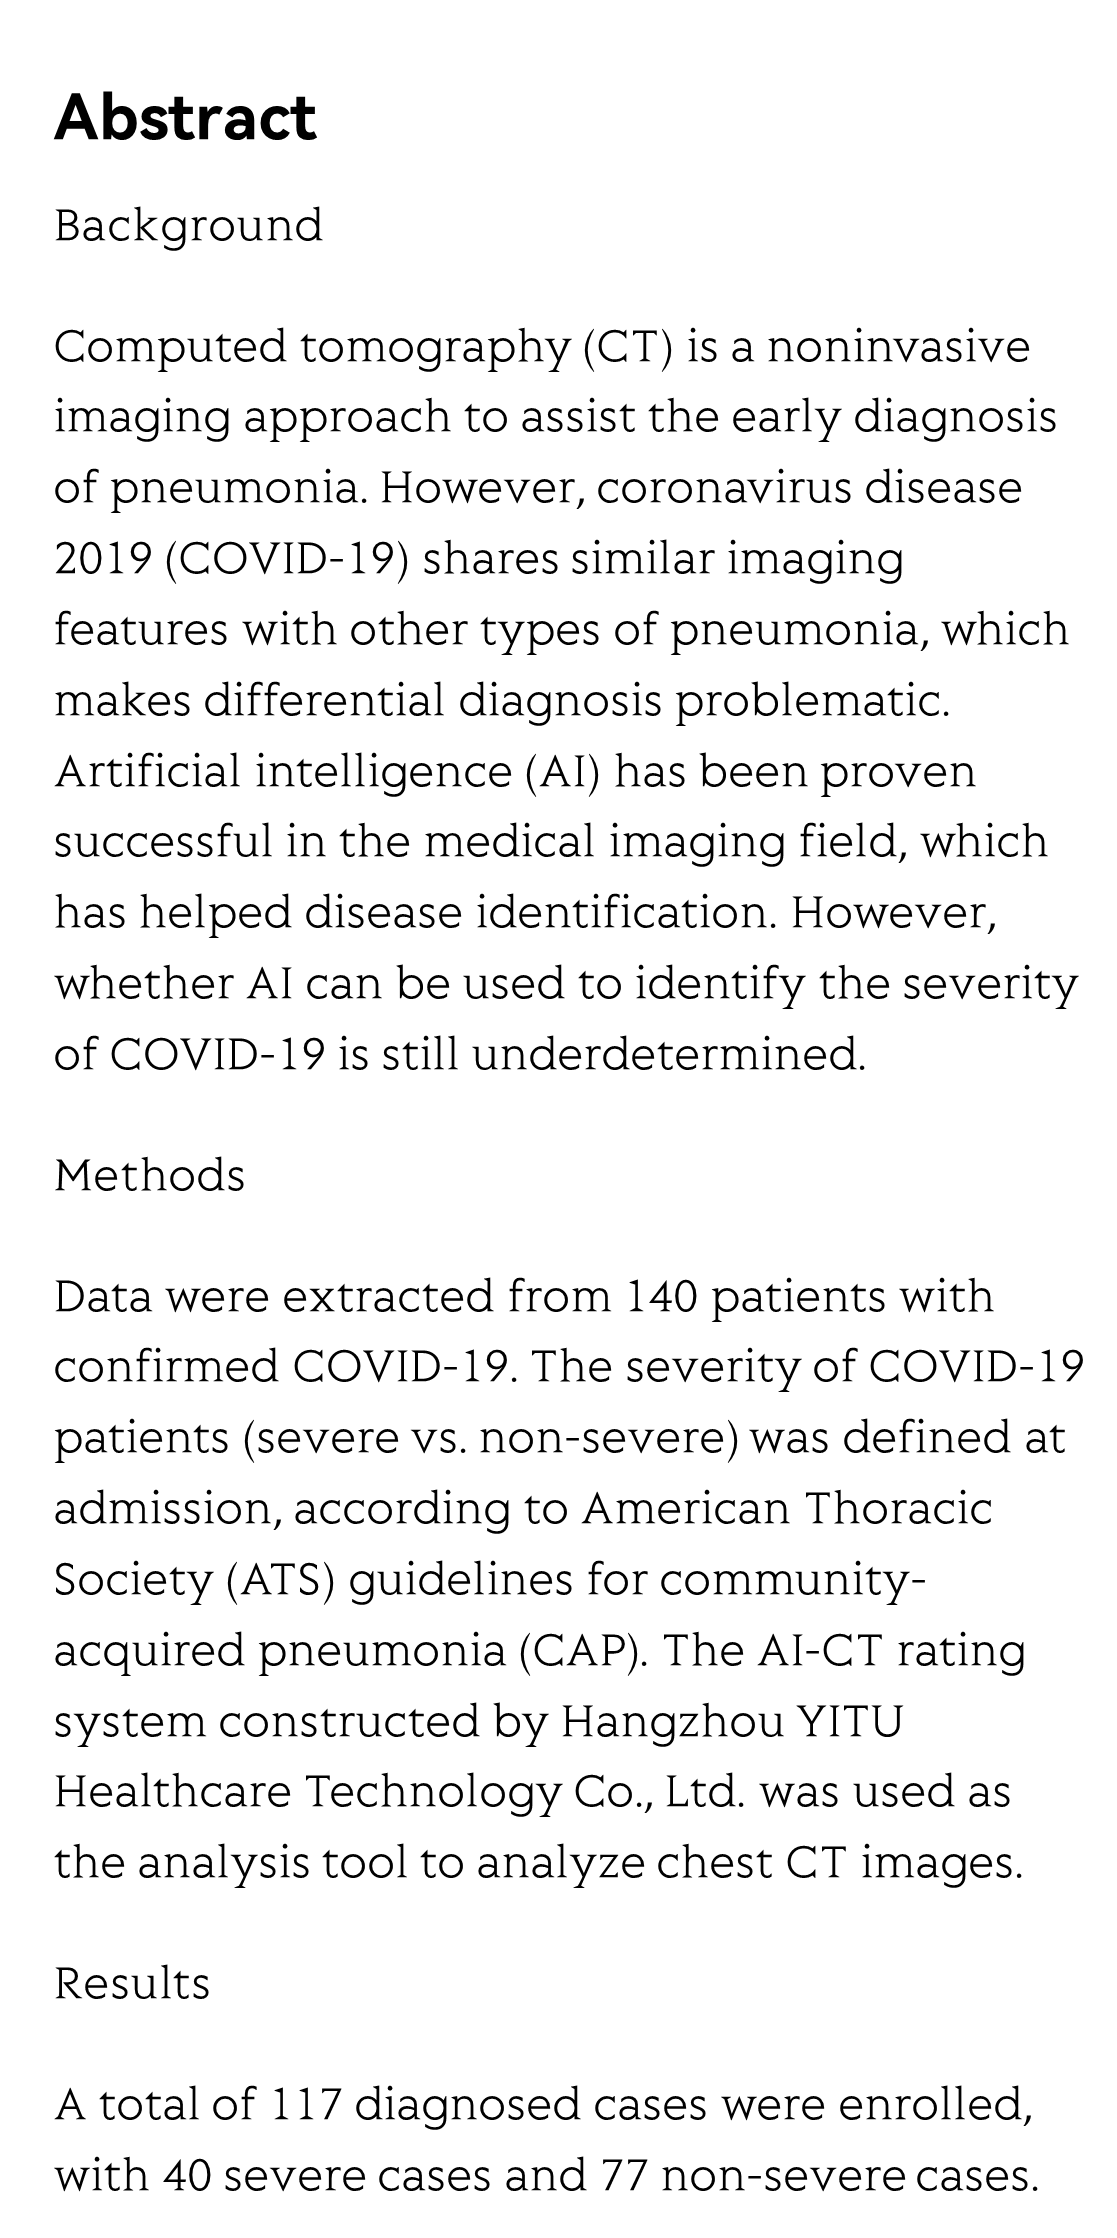 Artificial intelligence CT helps evaluate the severity of COVID-19 patients: A retrospective study_2